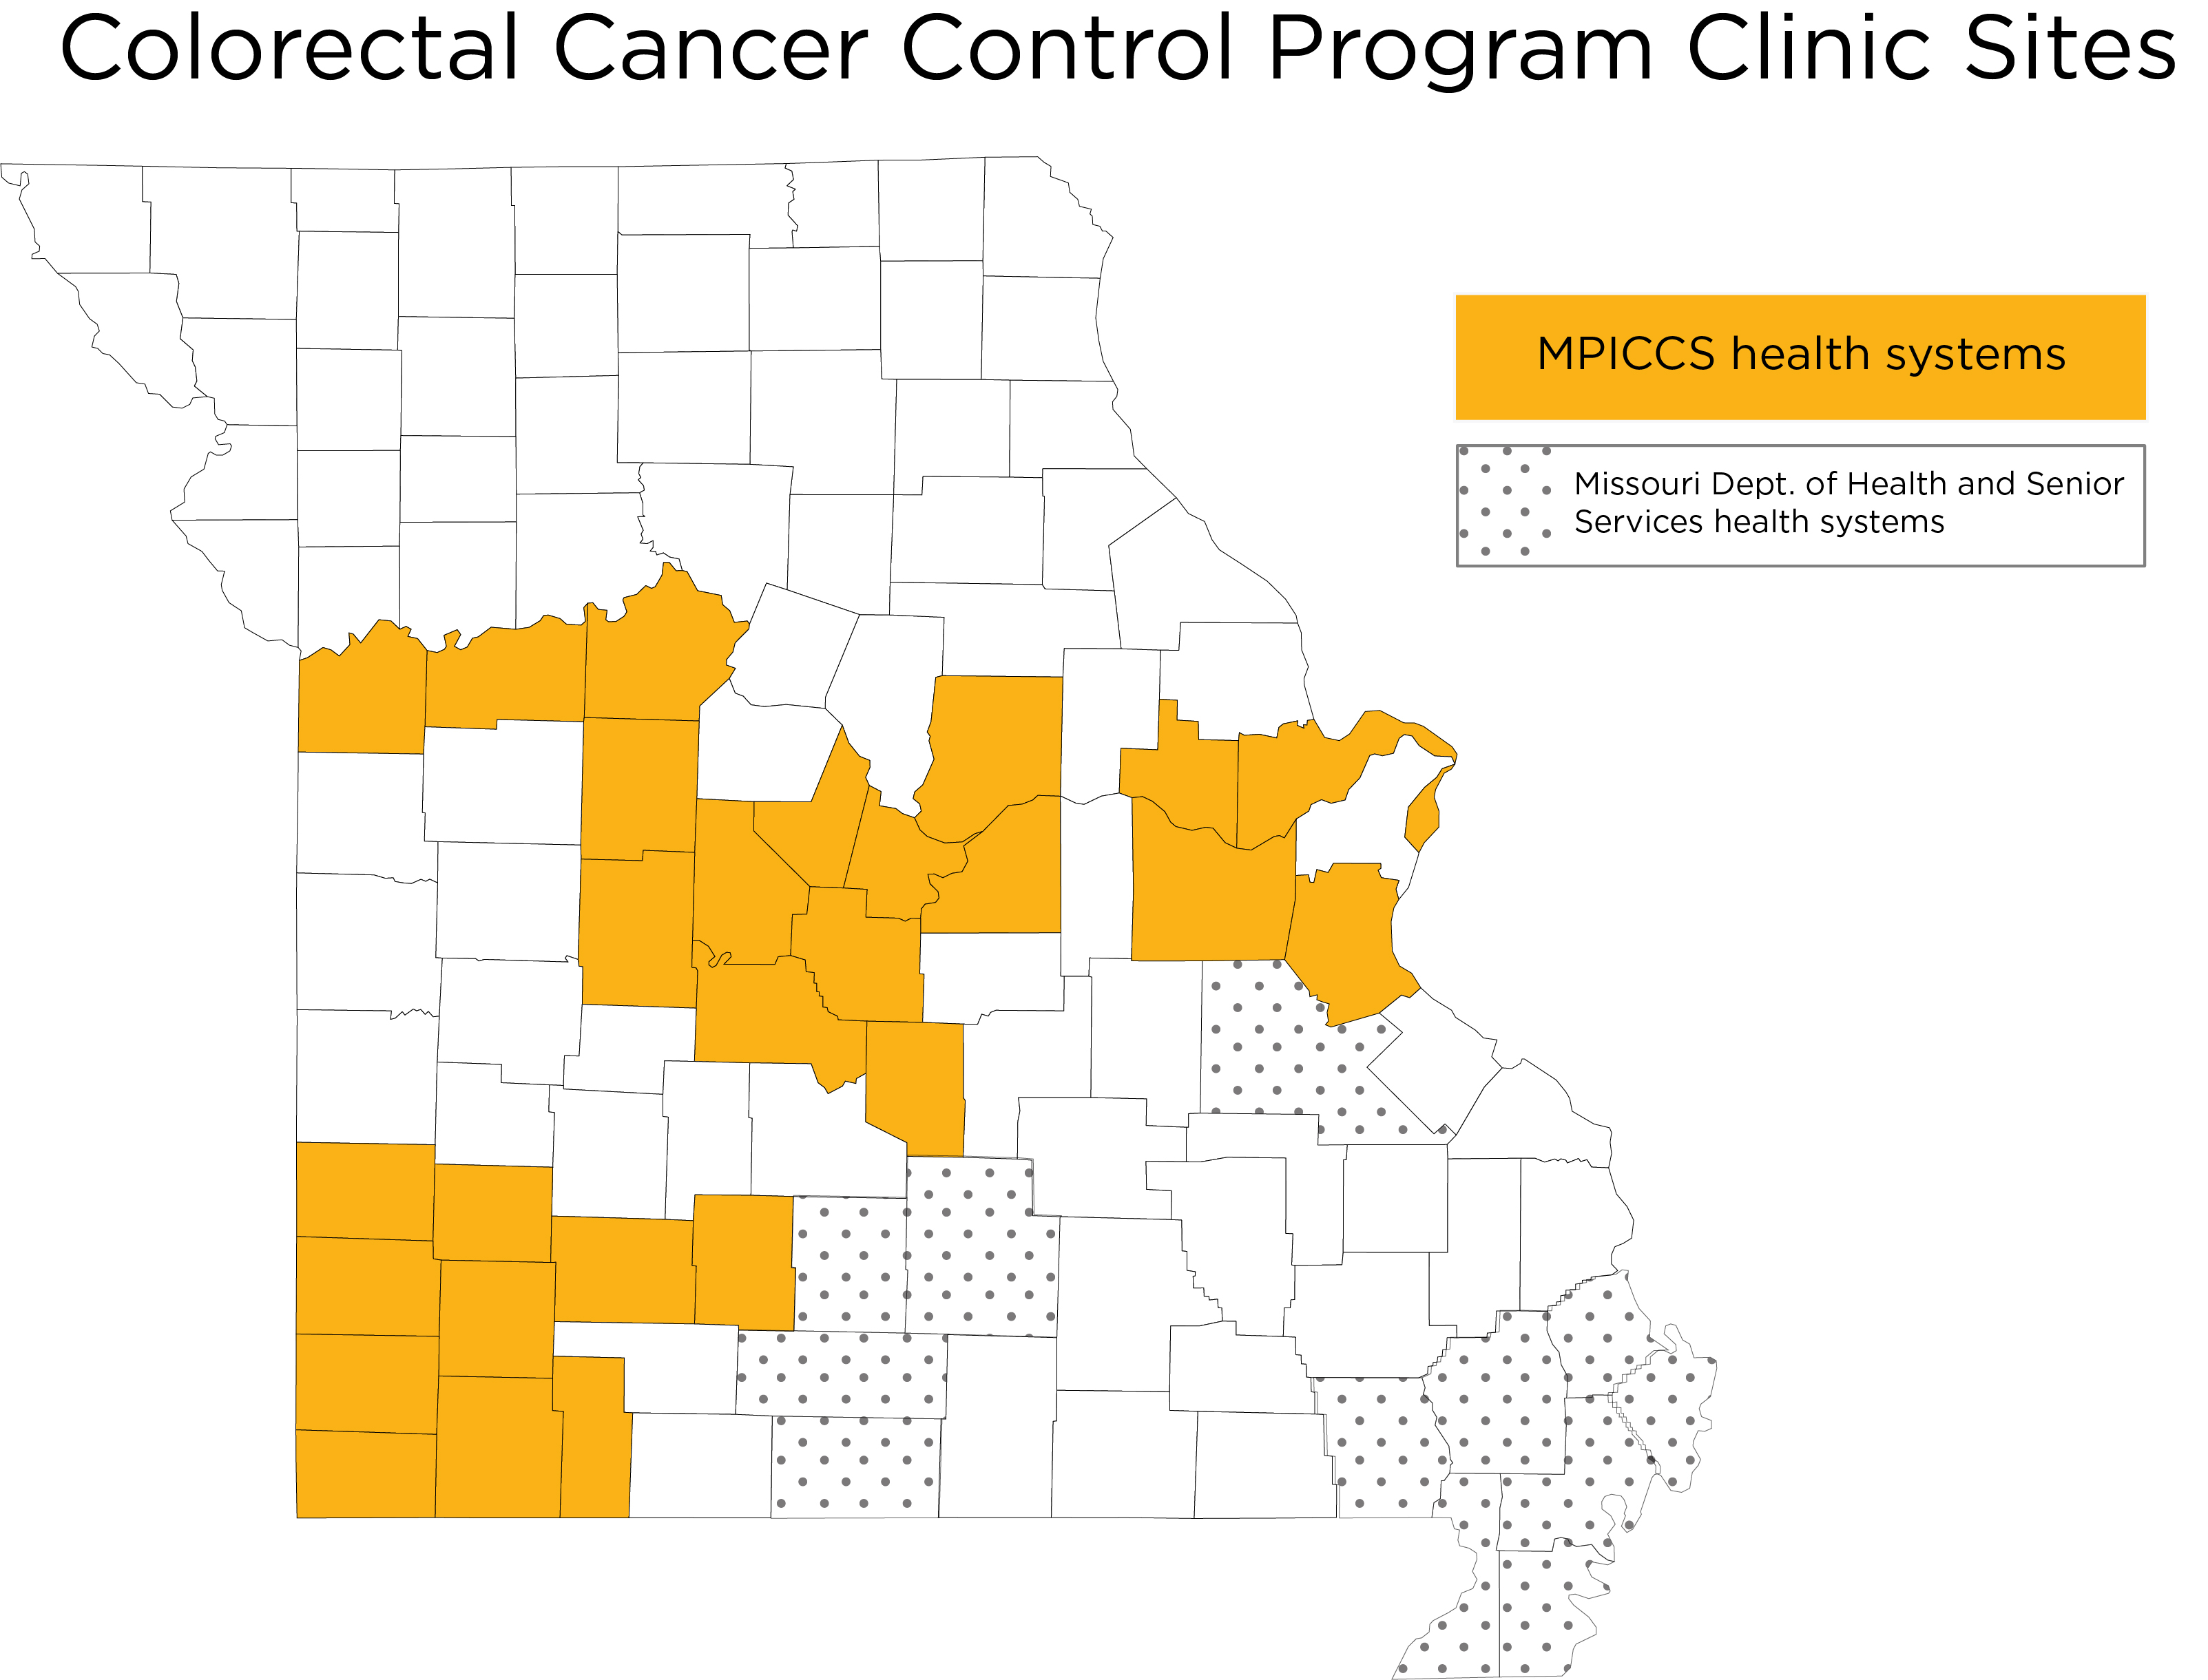 Map of Missouri with highlighted counties showing locations of colorectal cancer program sites. 